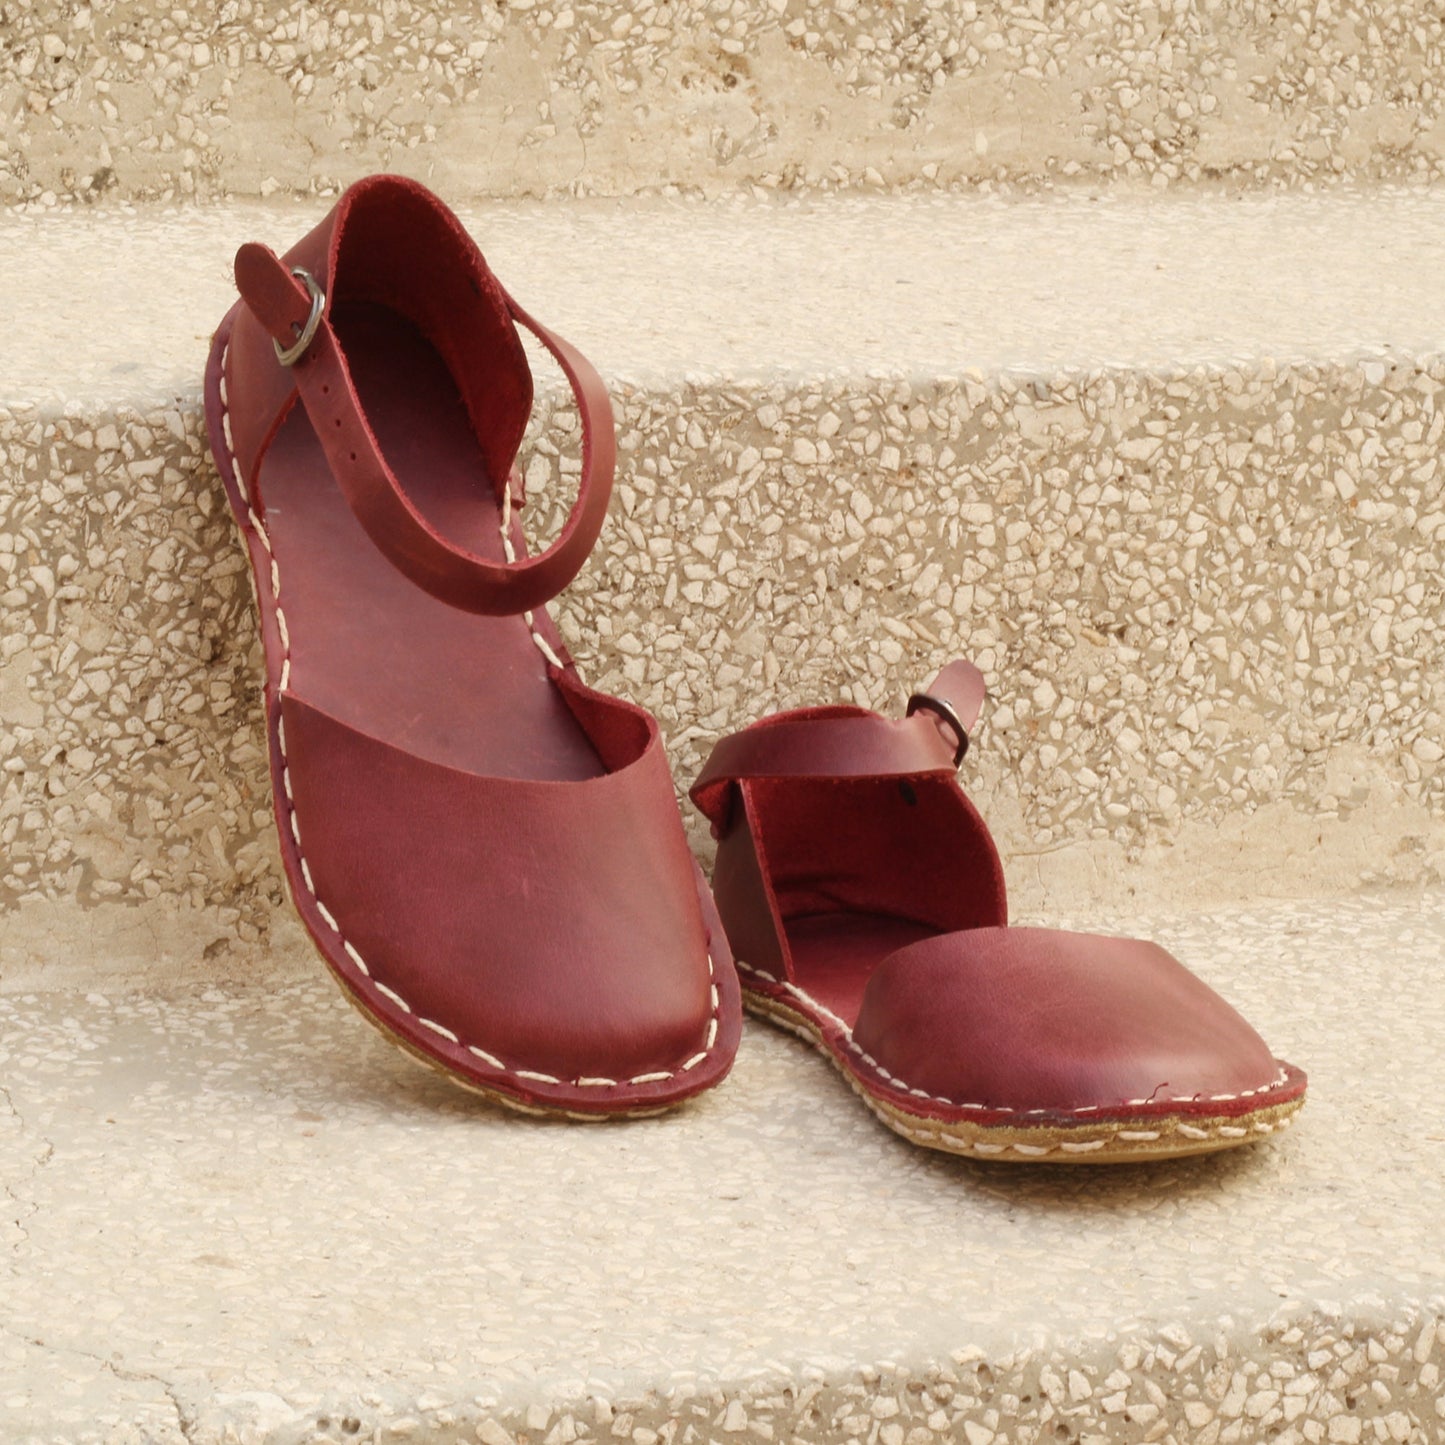 Women Sandals – Barefoot - Handmade – All Genuine Leather - Crazy Claret Red